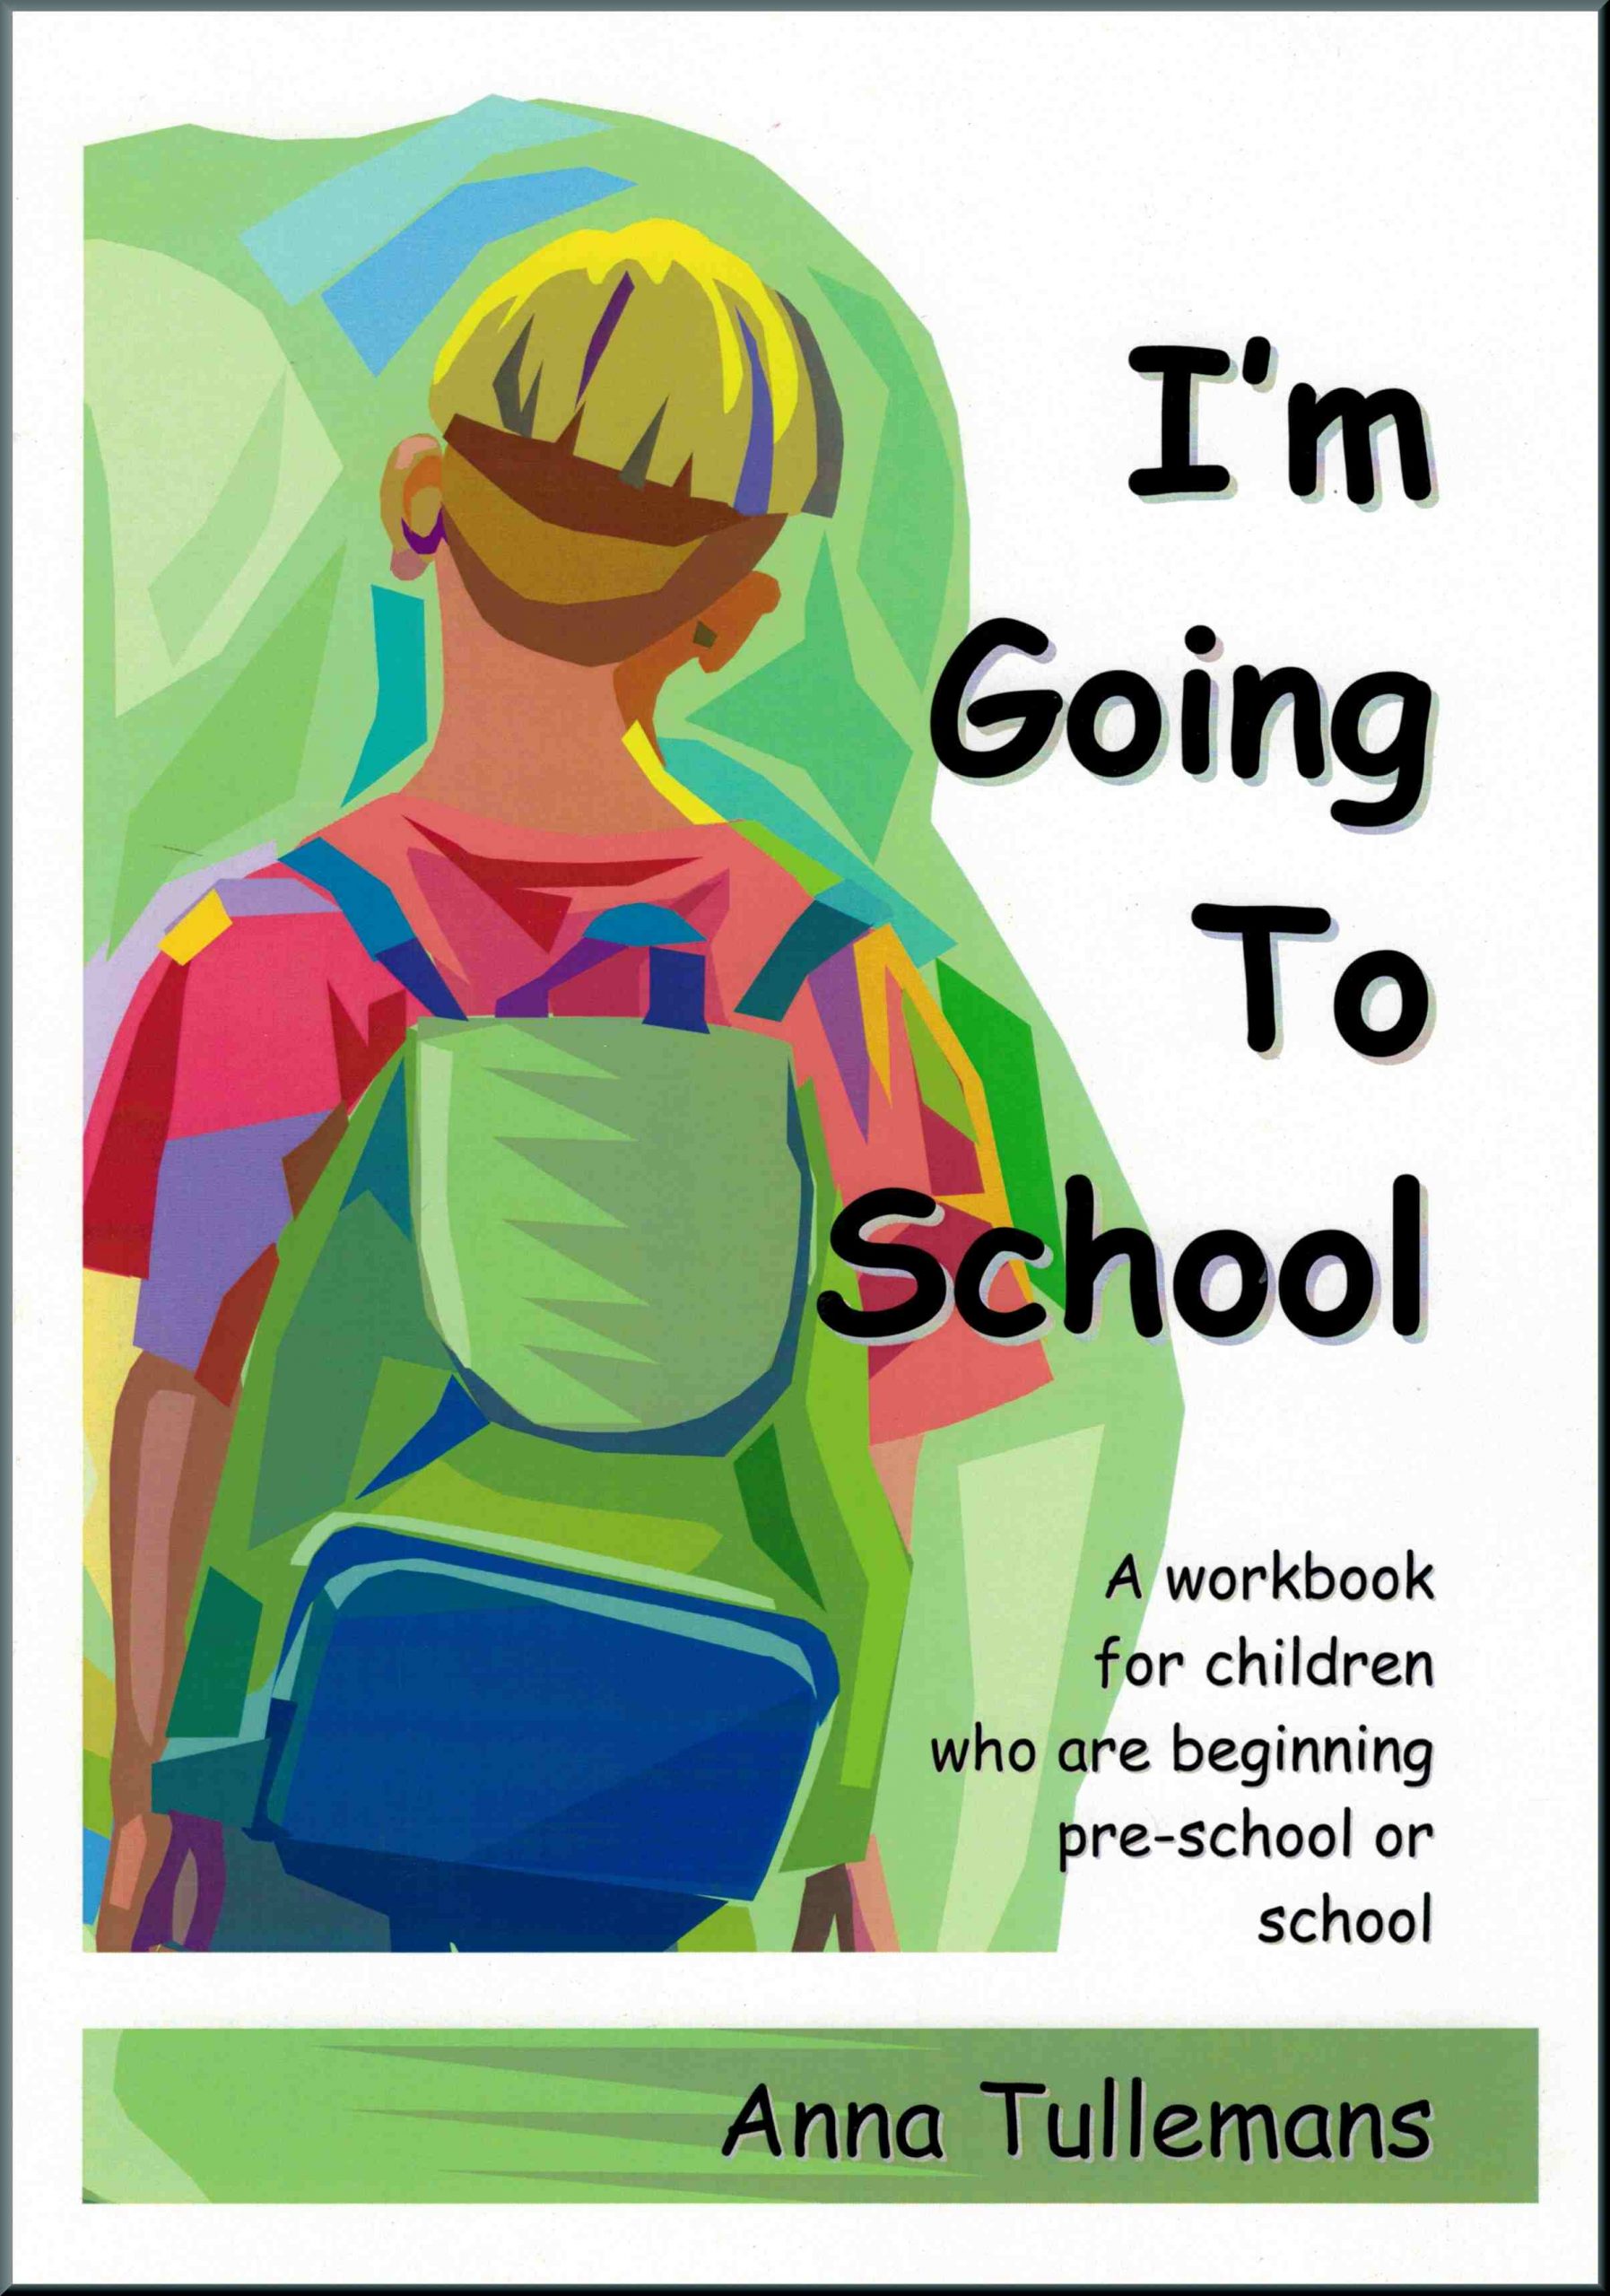 Preparing for the New School Year